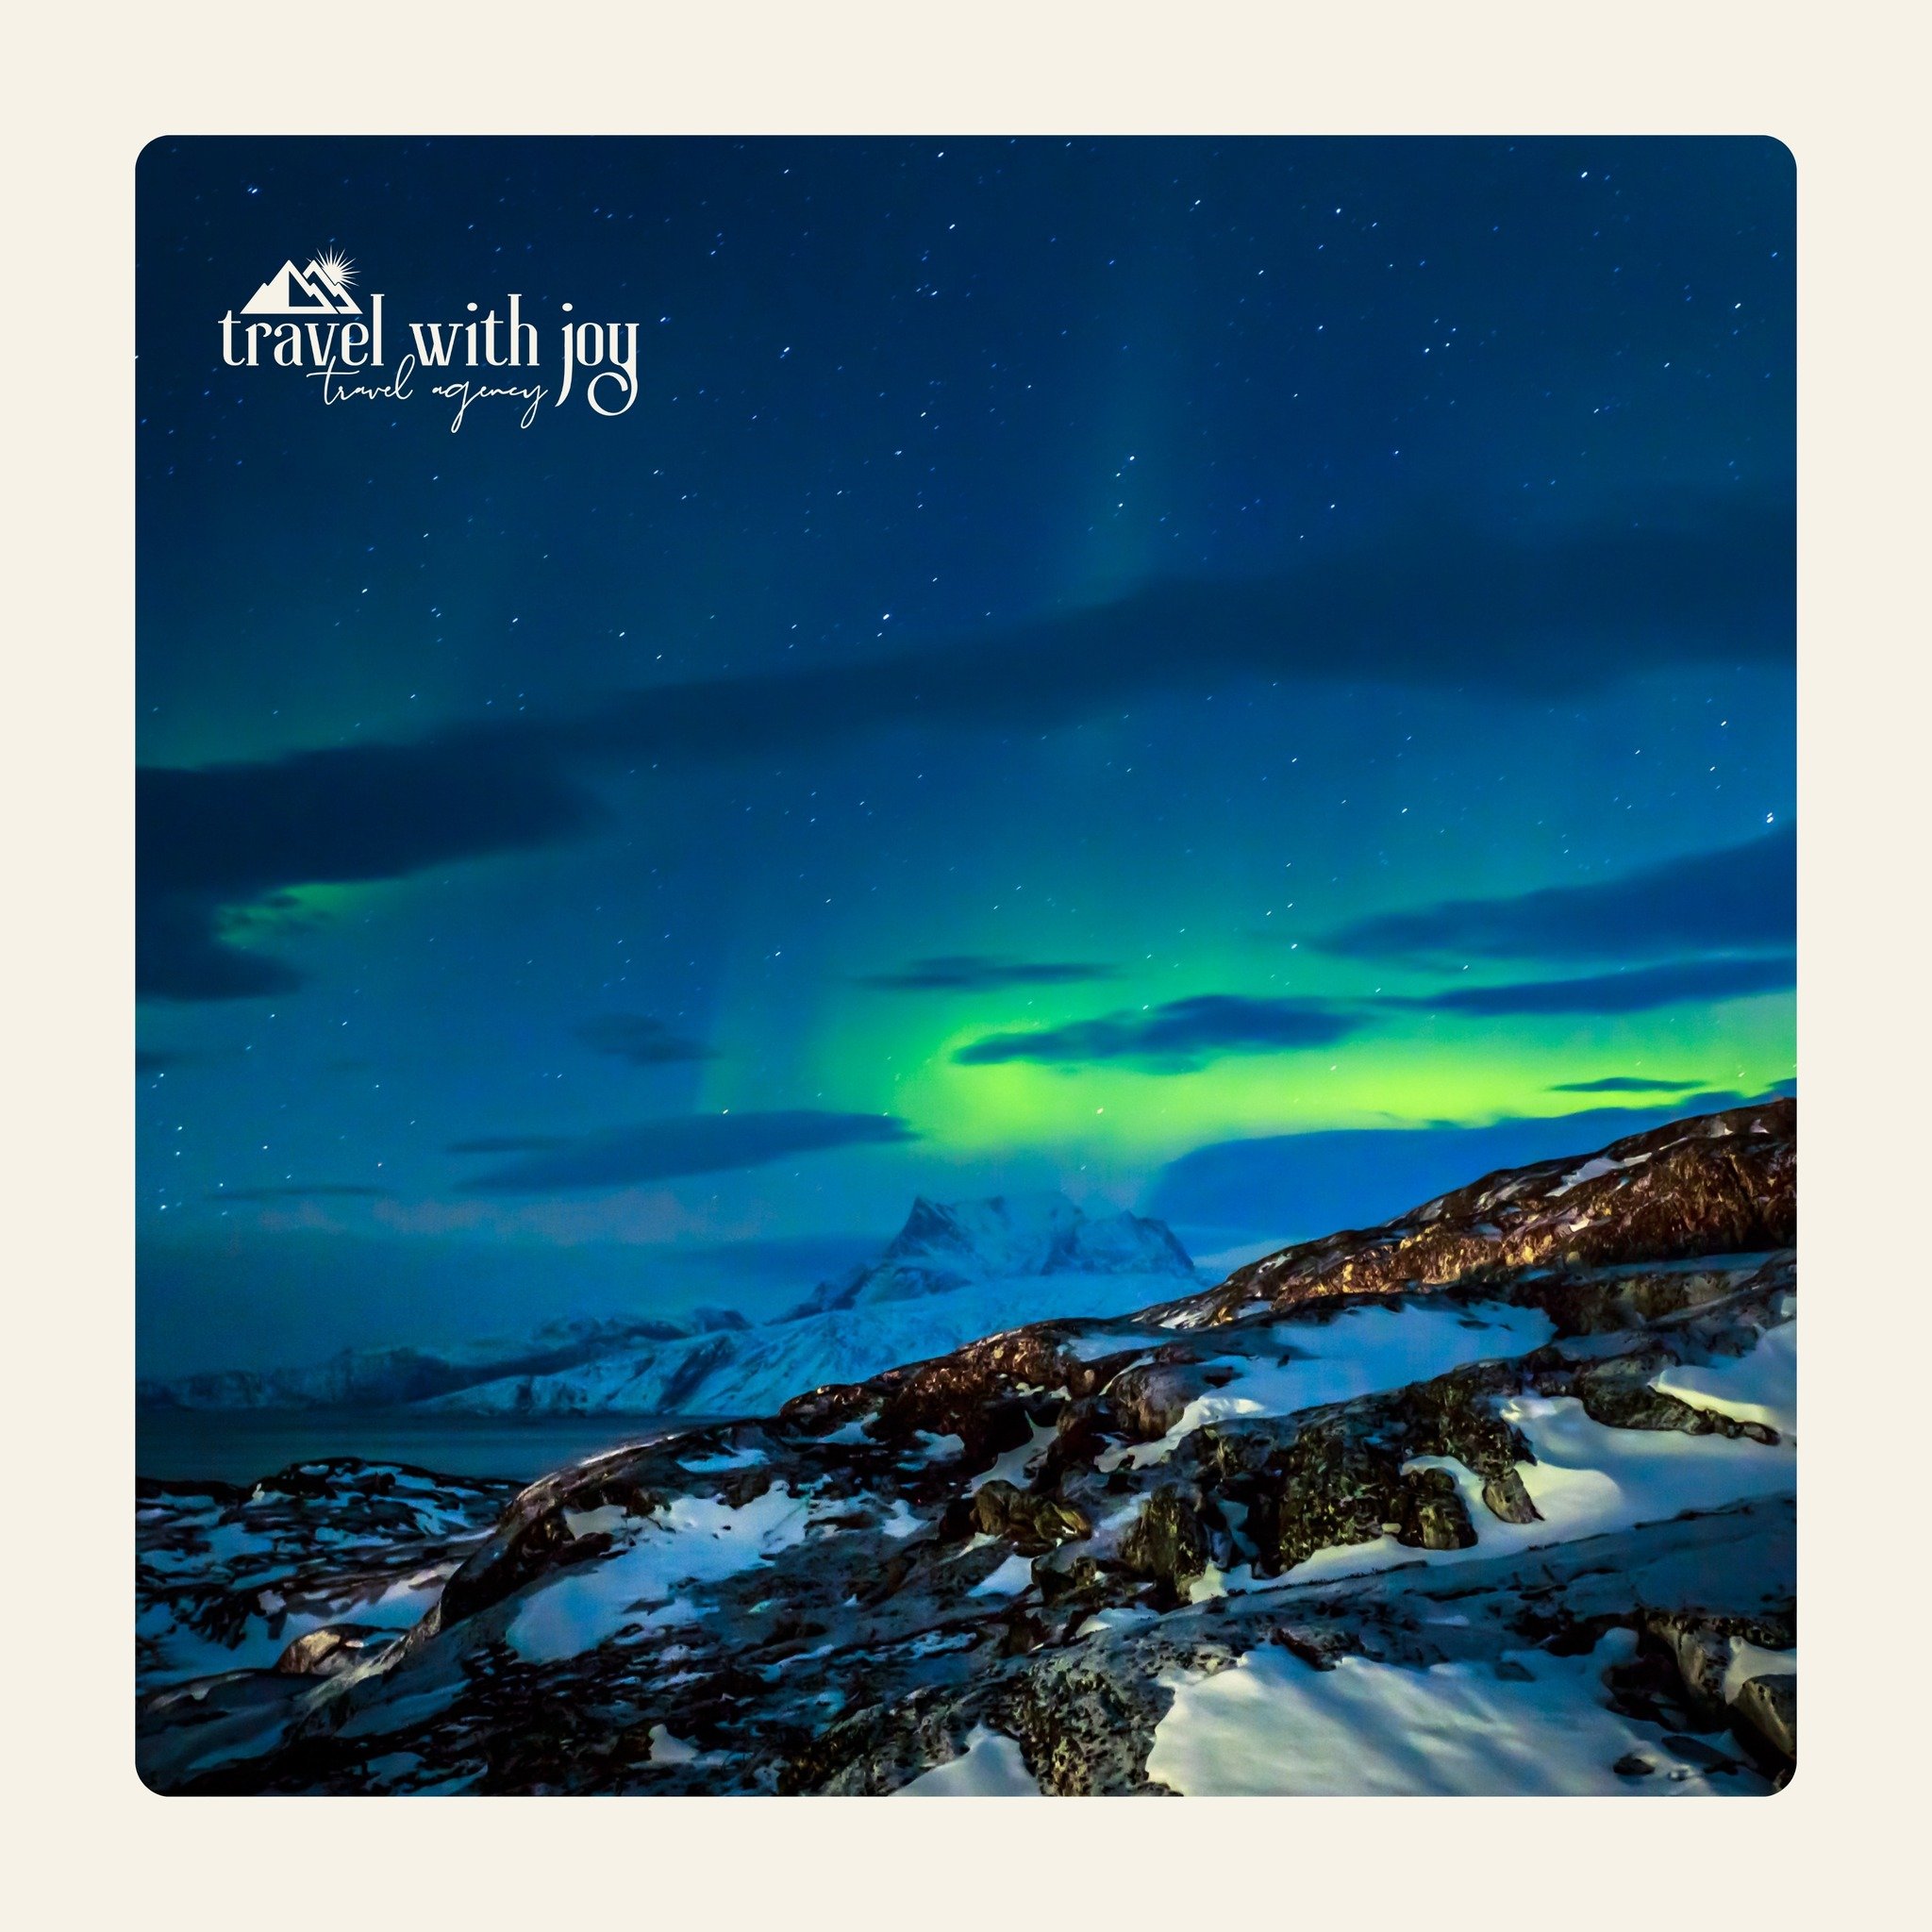 Experience the awe-inspiring sight of green, purple, and blue ribbons swirling across the Arctic sky! Elevate your travel bucket list by adding Nuuk, Greenland, where you can witness the mesmerizing phenomenon of the Northern Lights. Contact me today